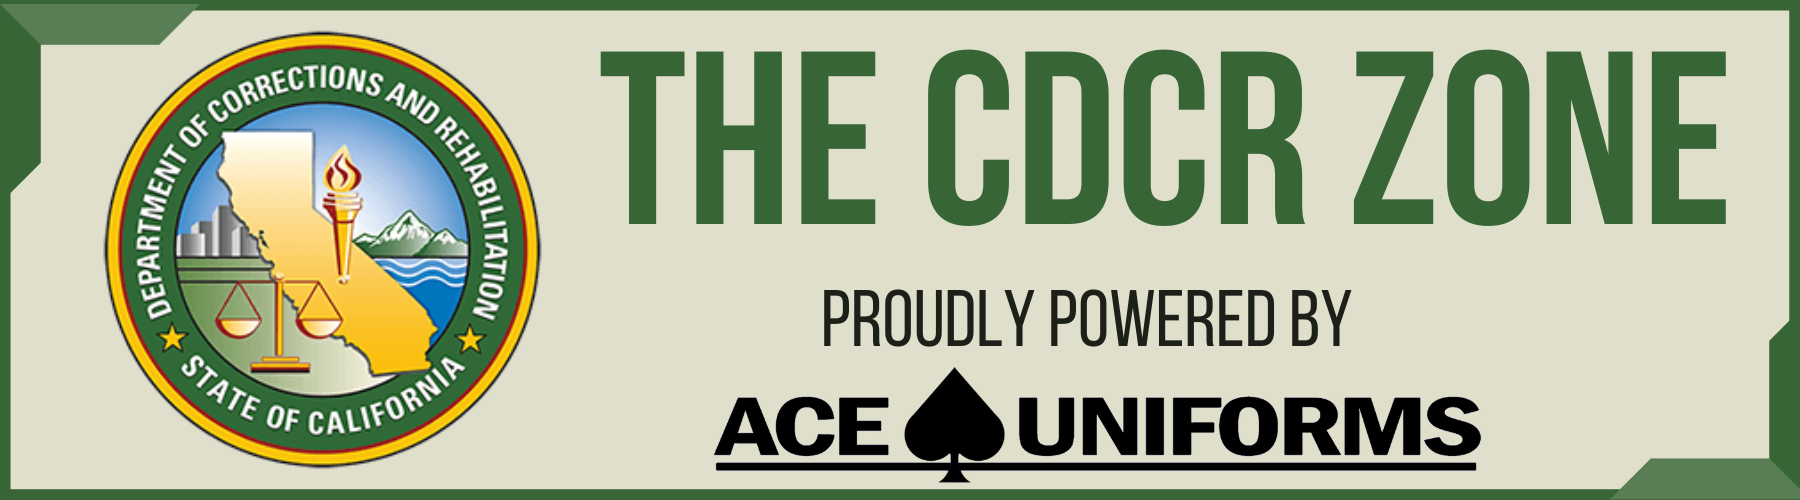 Shop/Buy CDCR Uniforms and Gear CDCR Zone powered by Ace Uniforms